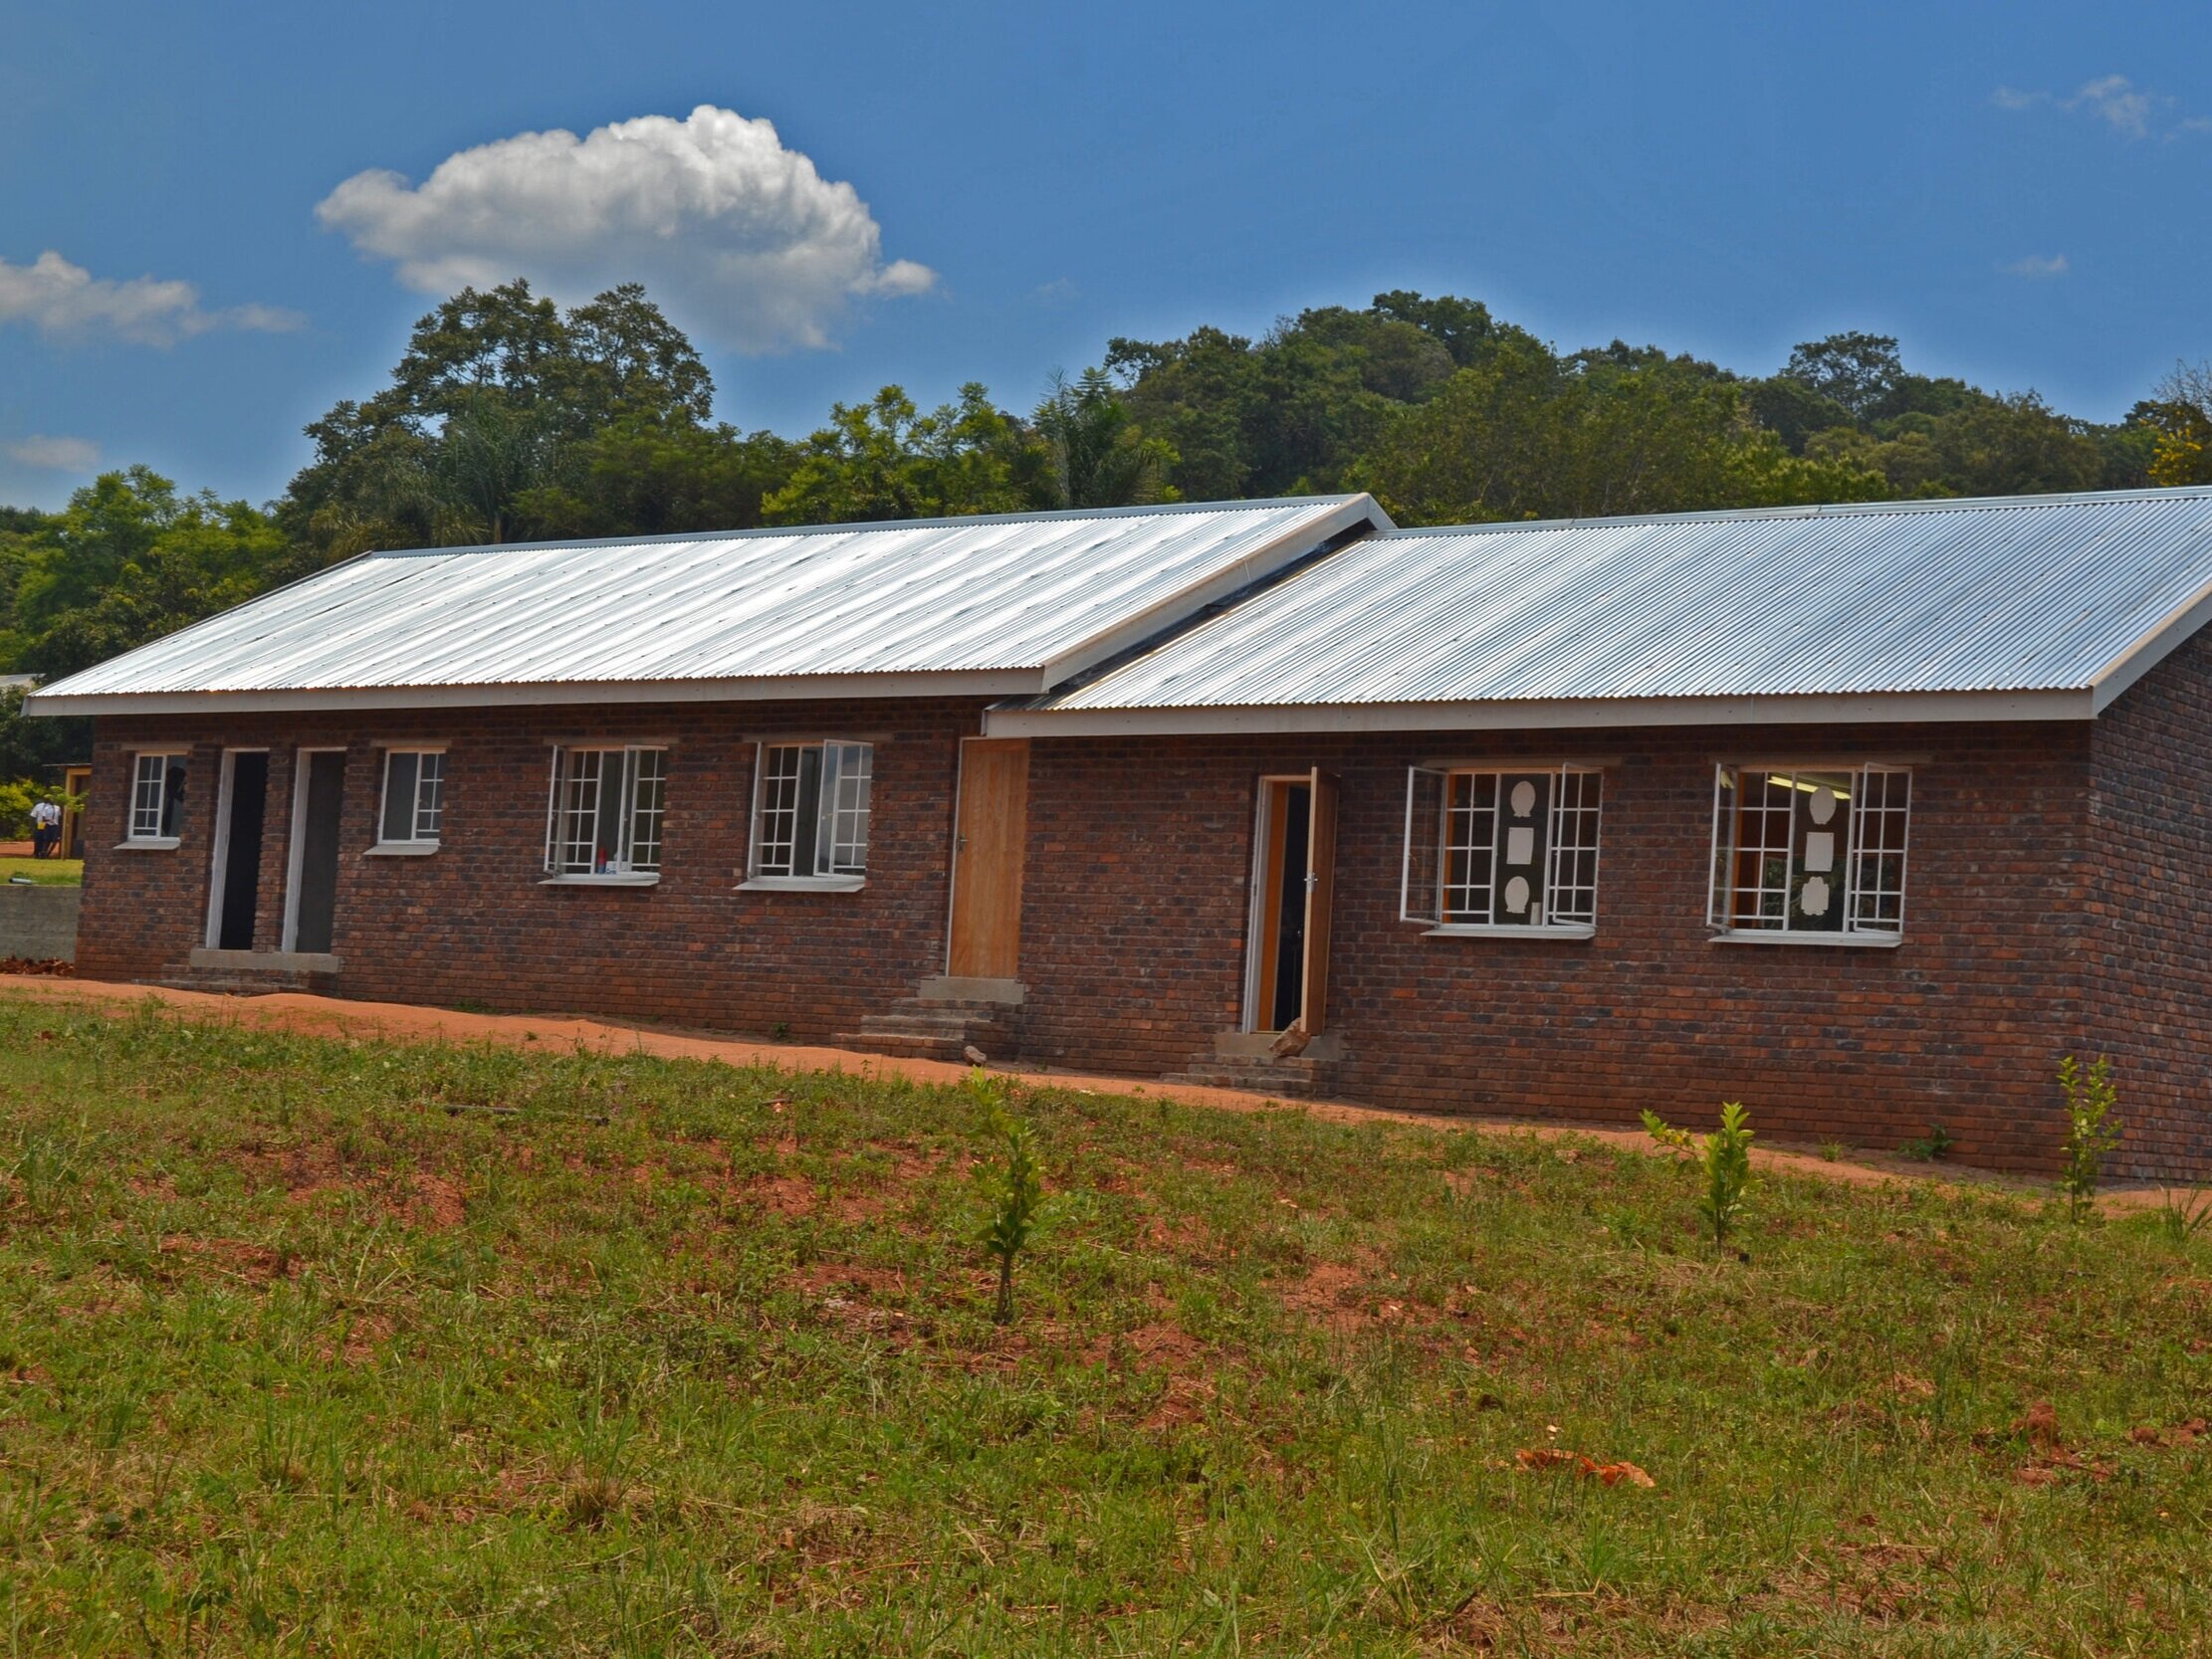 First classroom block from Classrooms for Africa